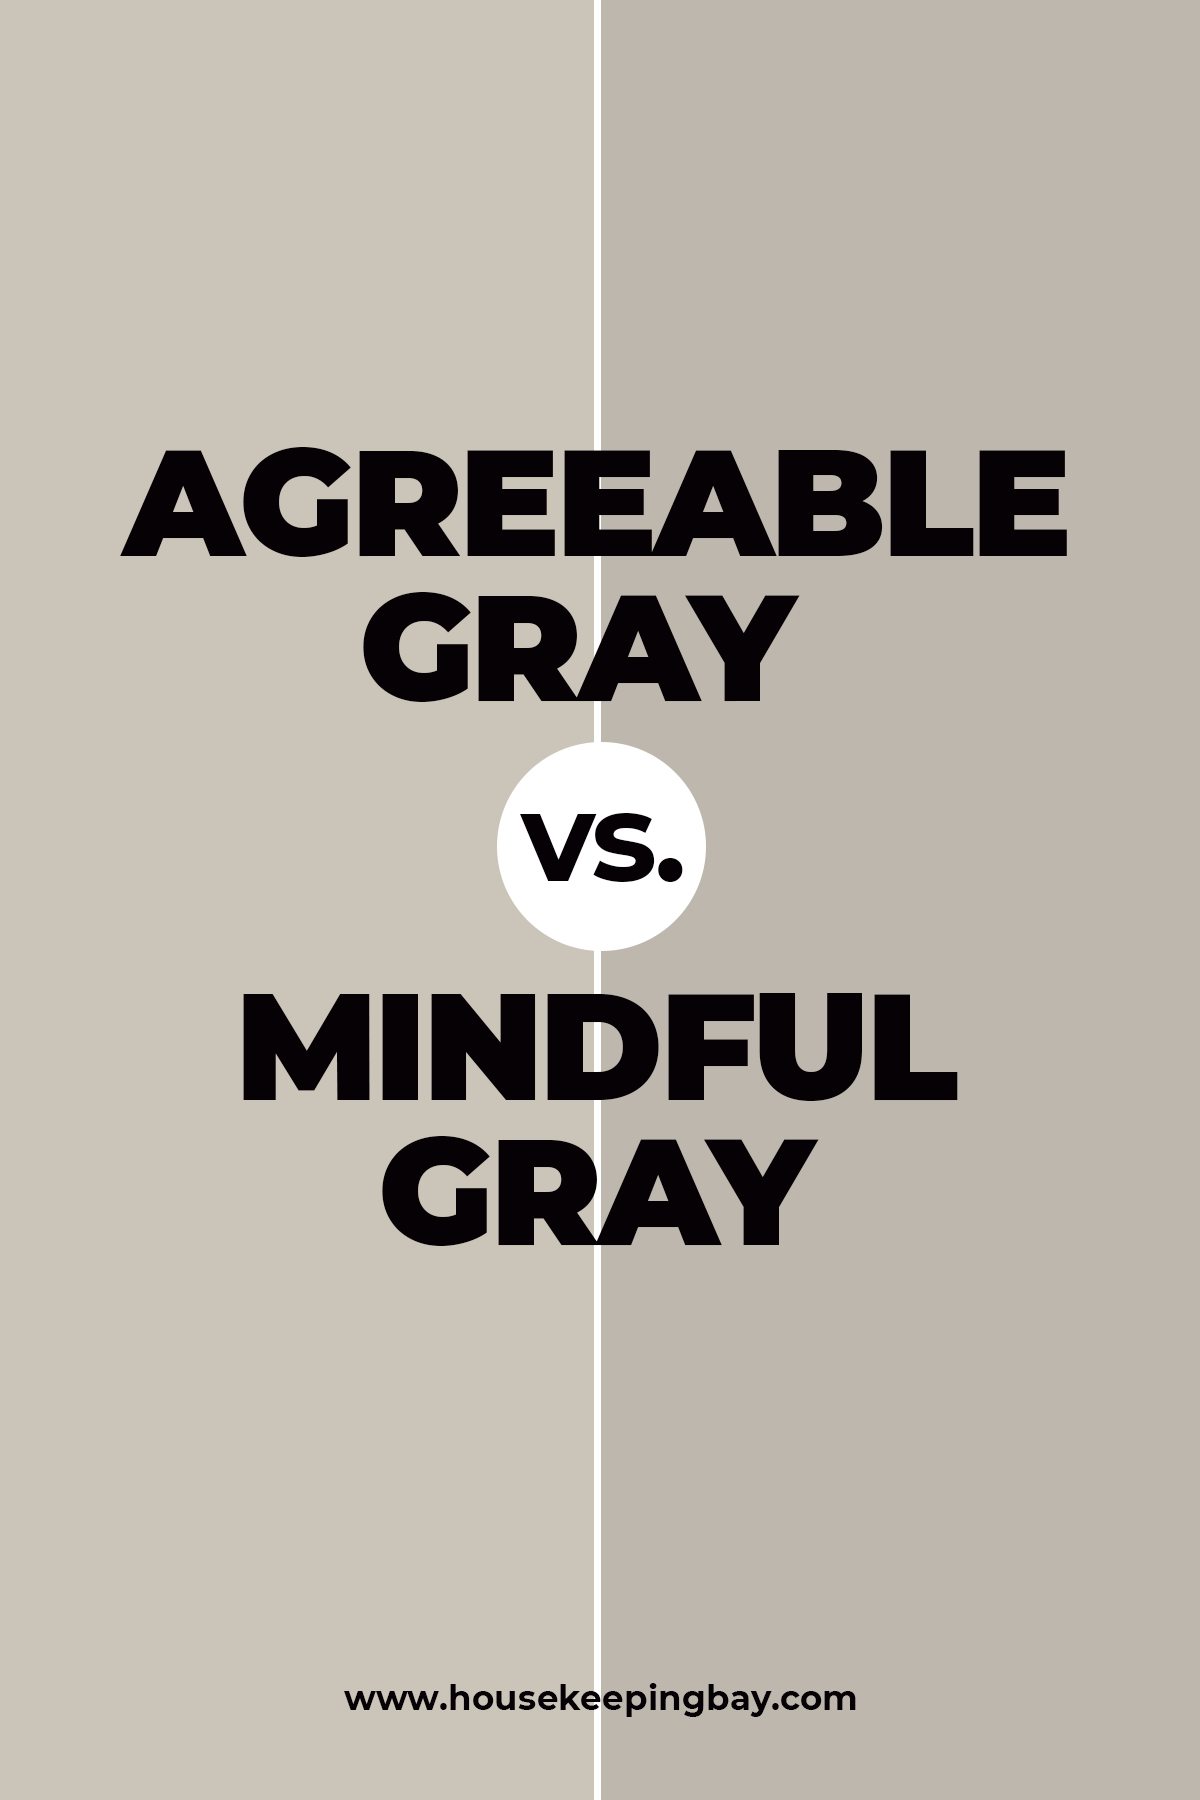 Agreeable Gray vs. Mindful Gray